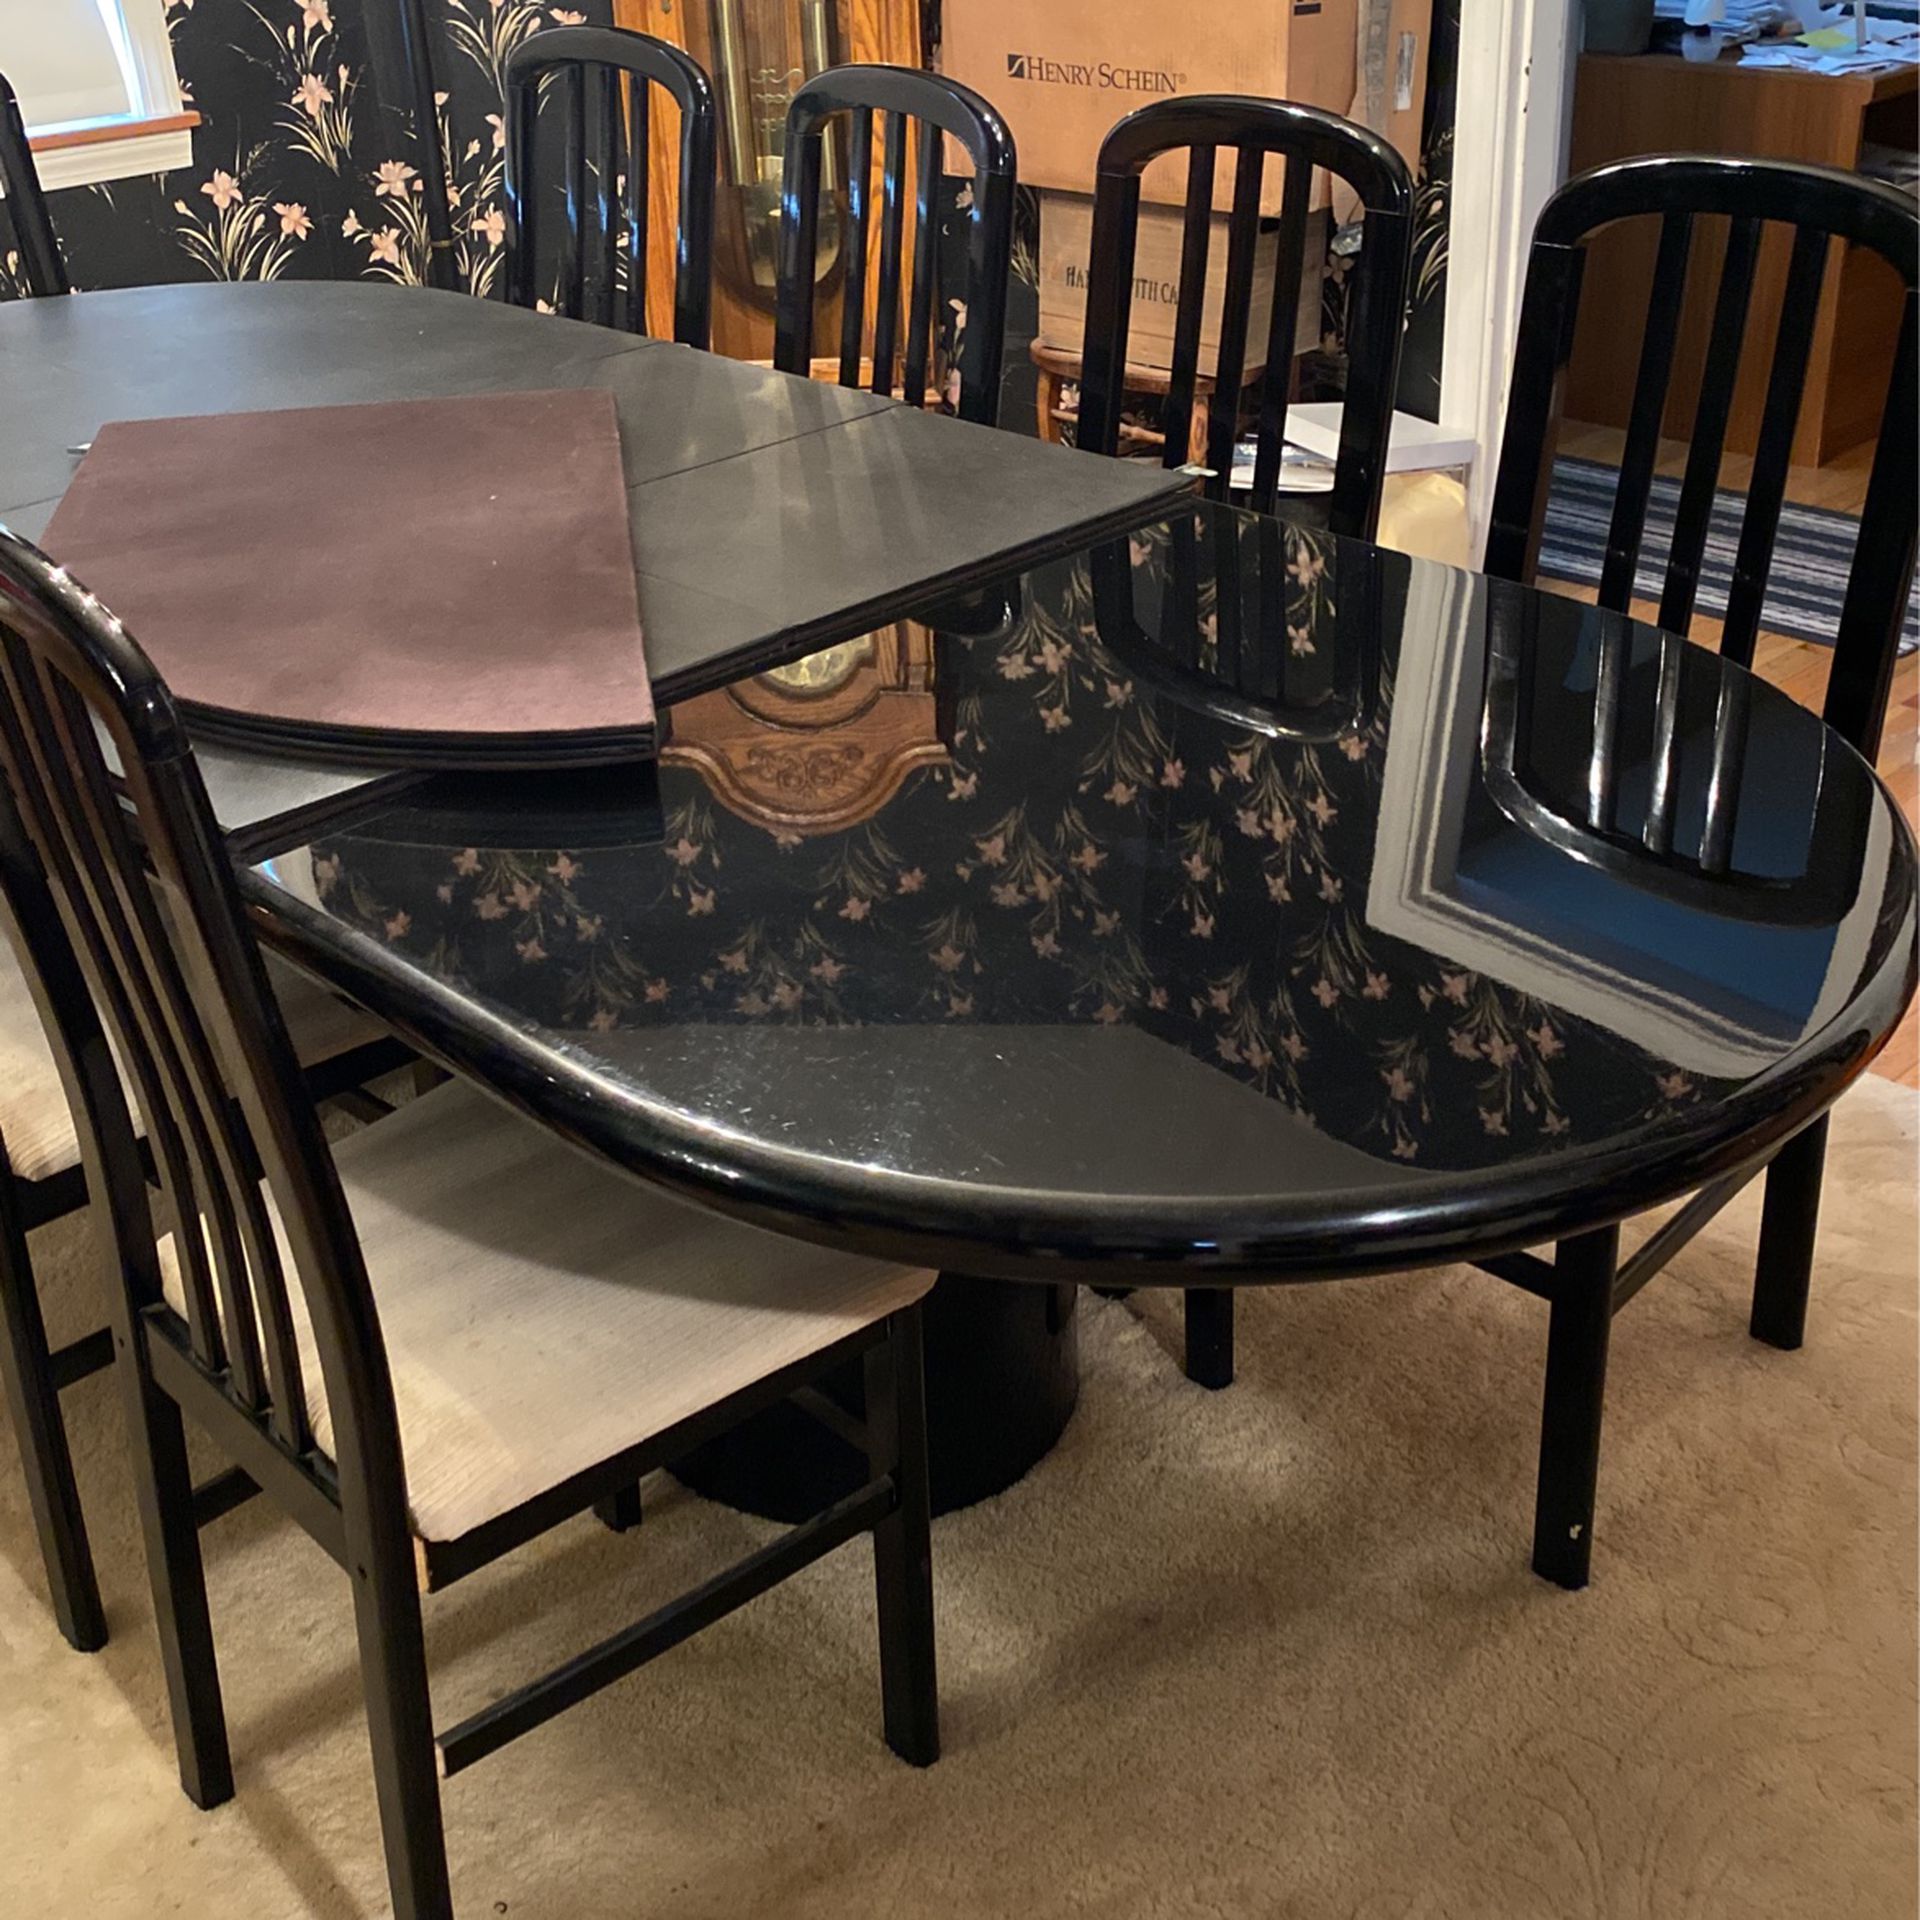 Black Lacquer Dinning Room Set Imported From Italy  Full Length Is 103” . It Has Two15.5 Leaf’s that Are Removable. It Also has custom made pads  That